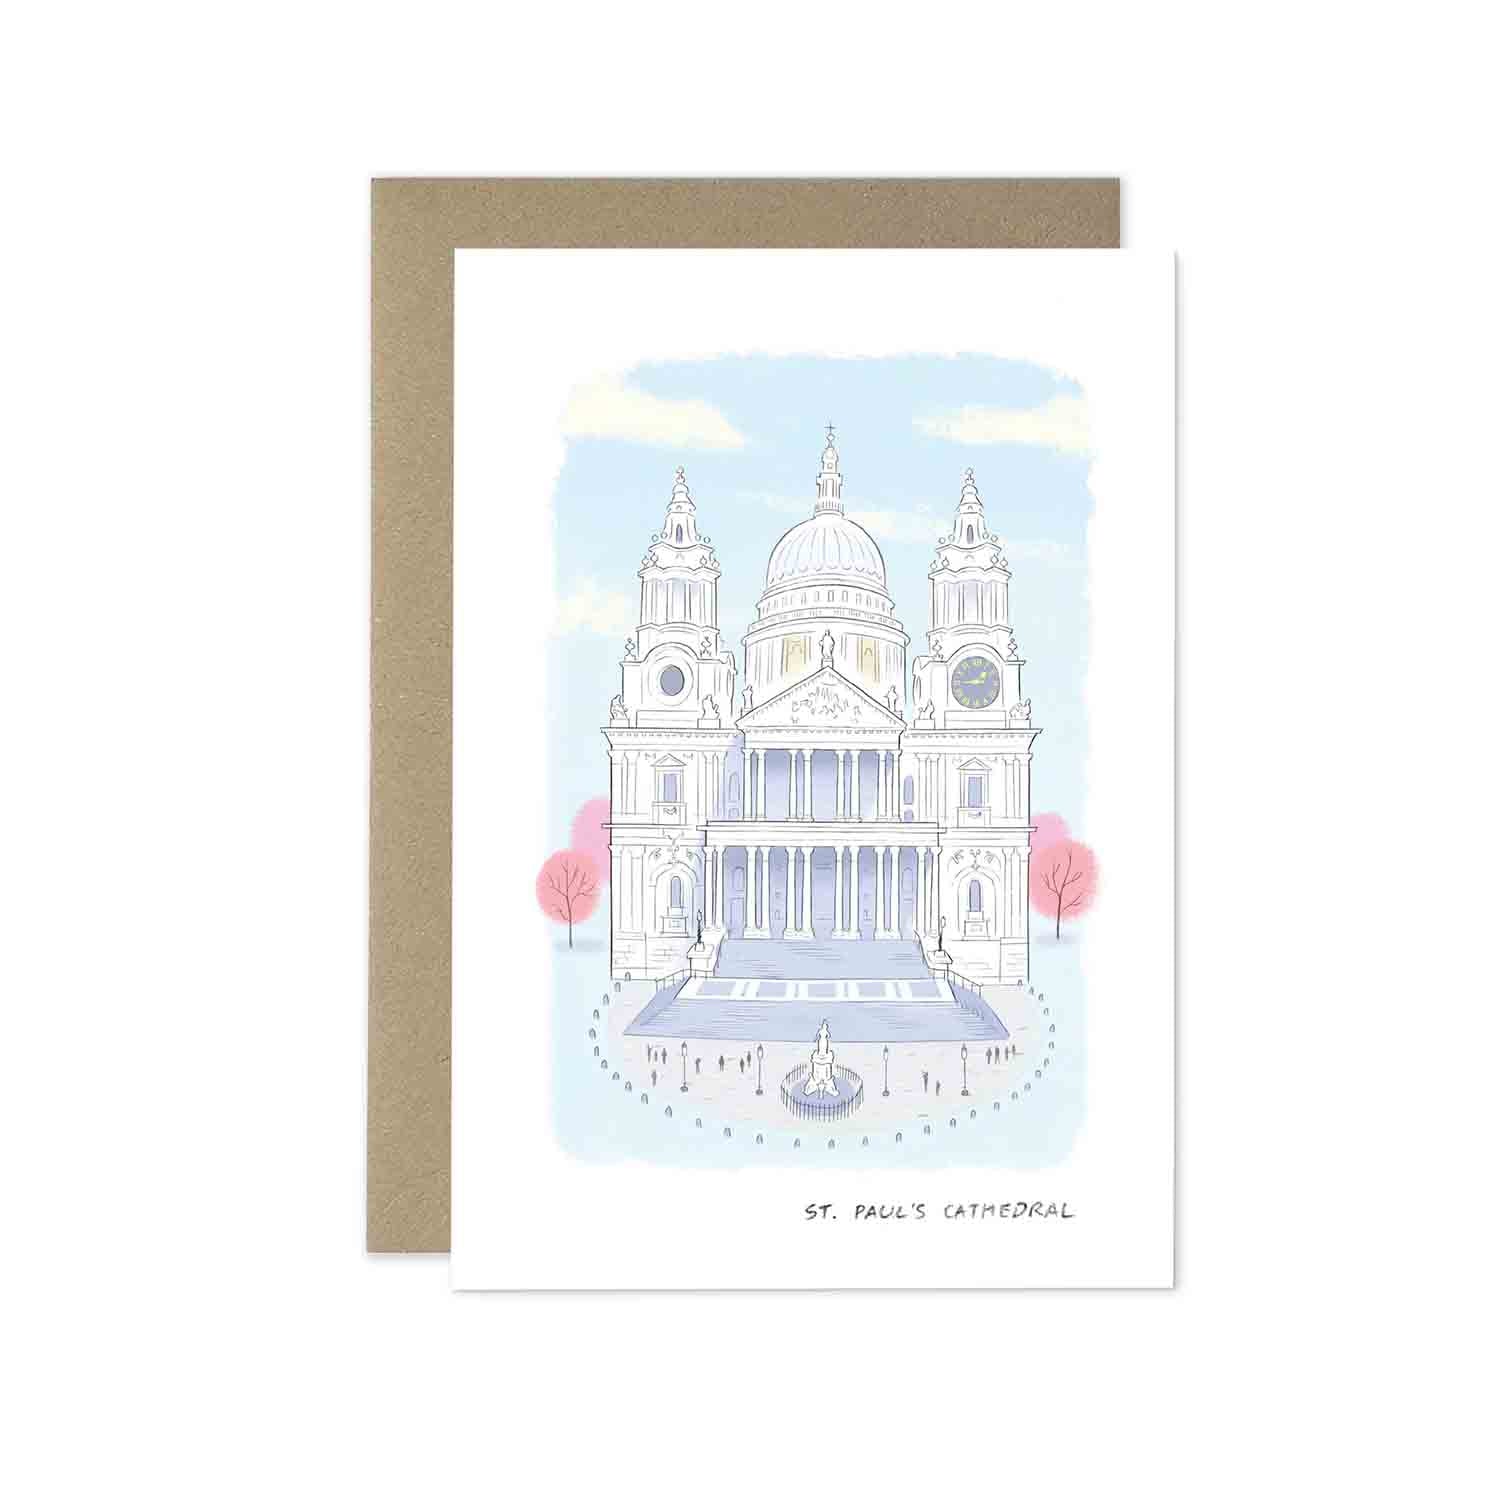 London's St Paul's Cathedral beautifully illustrated on a greeting card from mike green illustration.